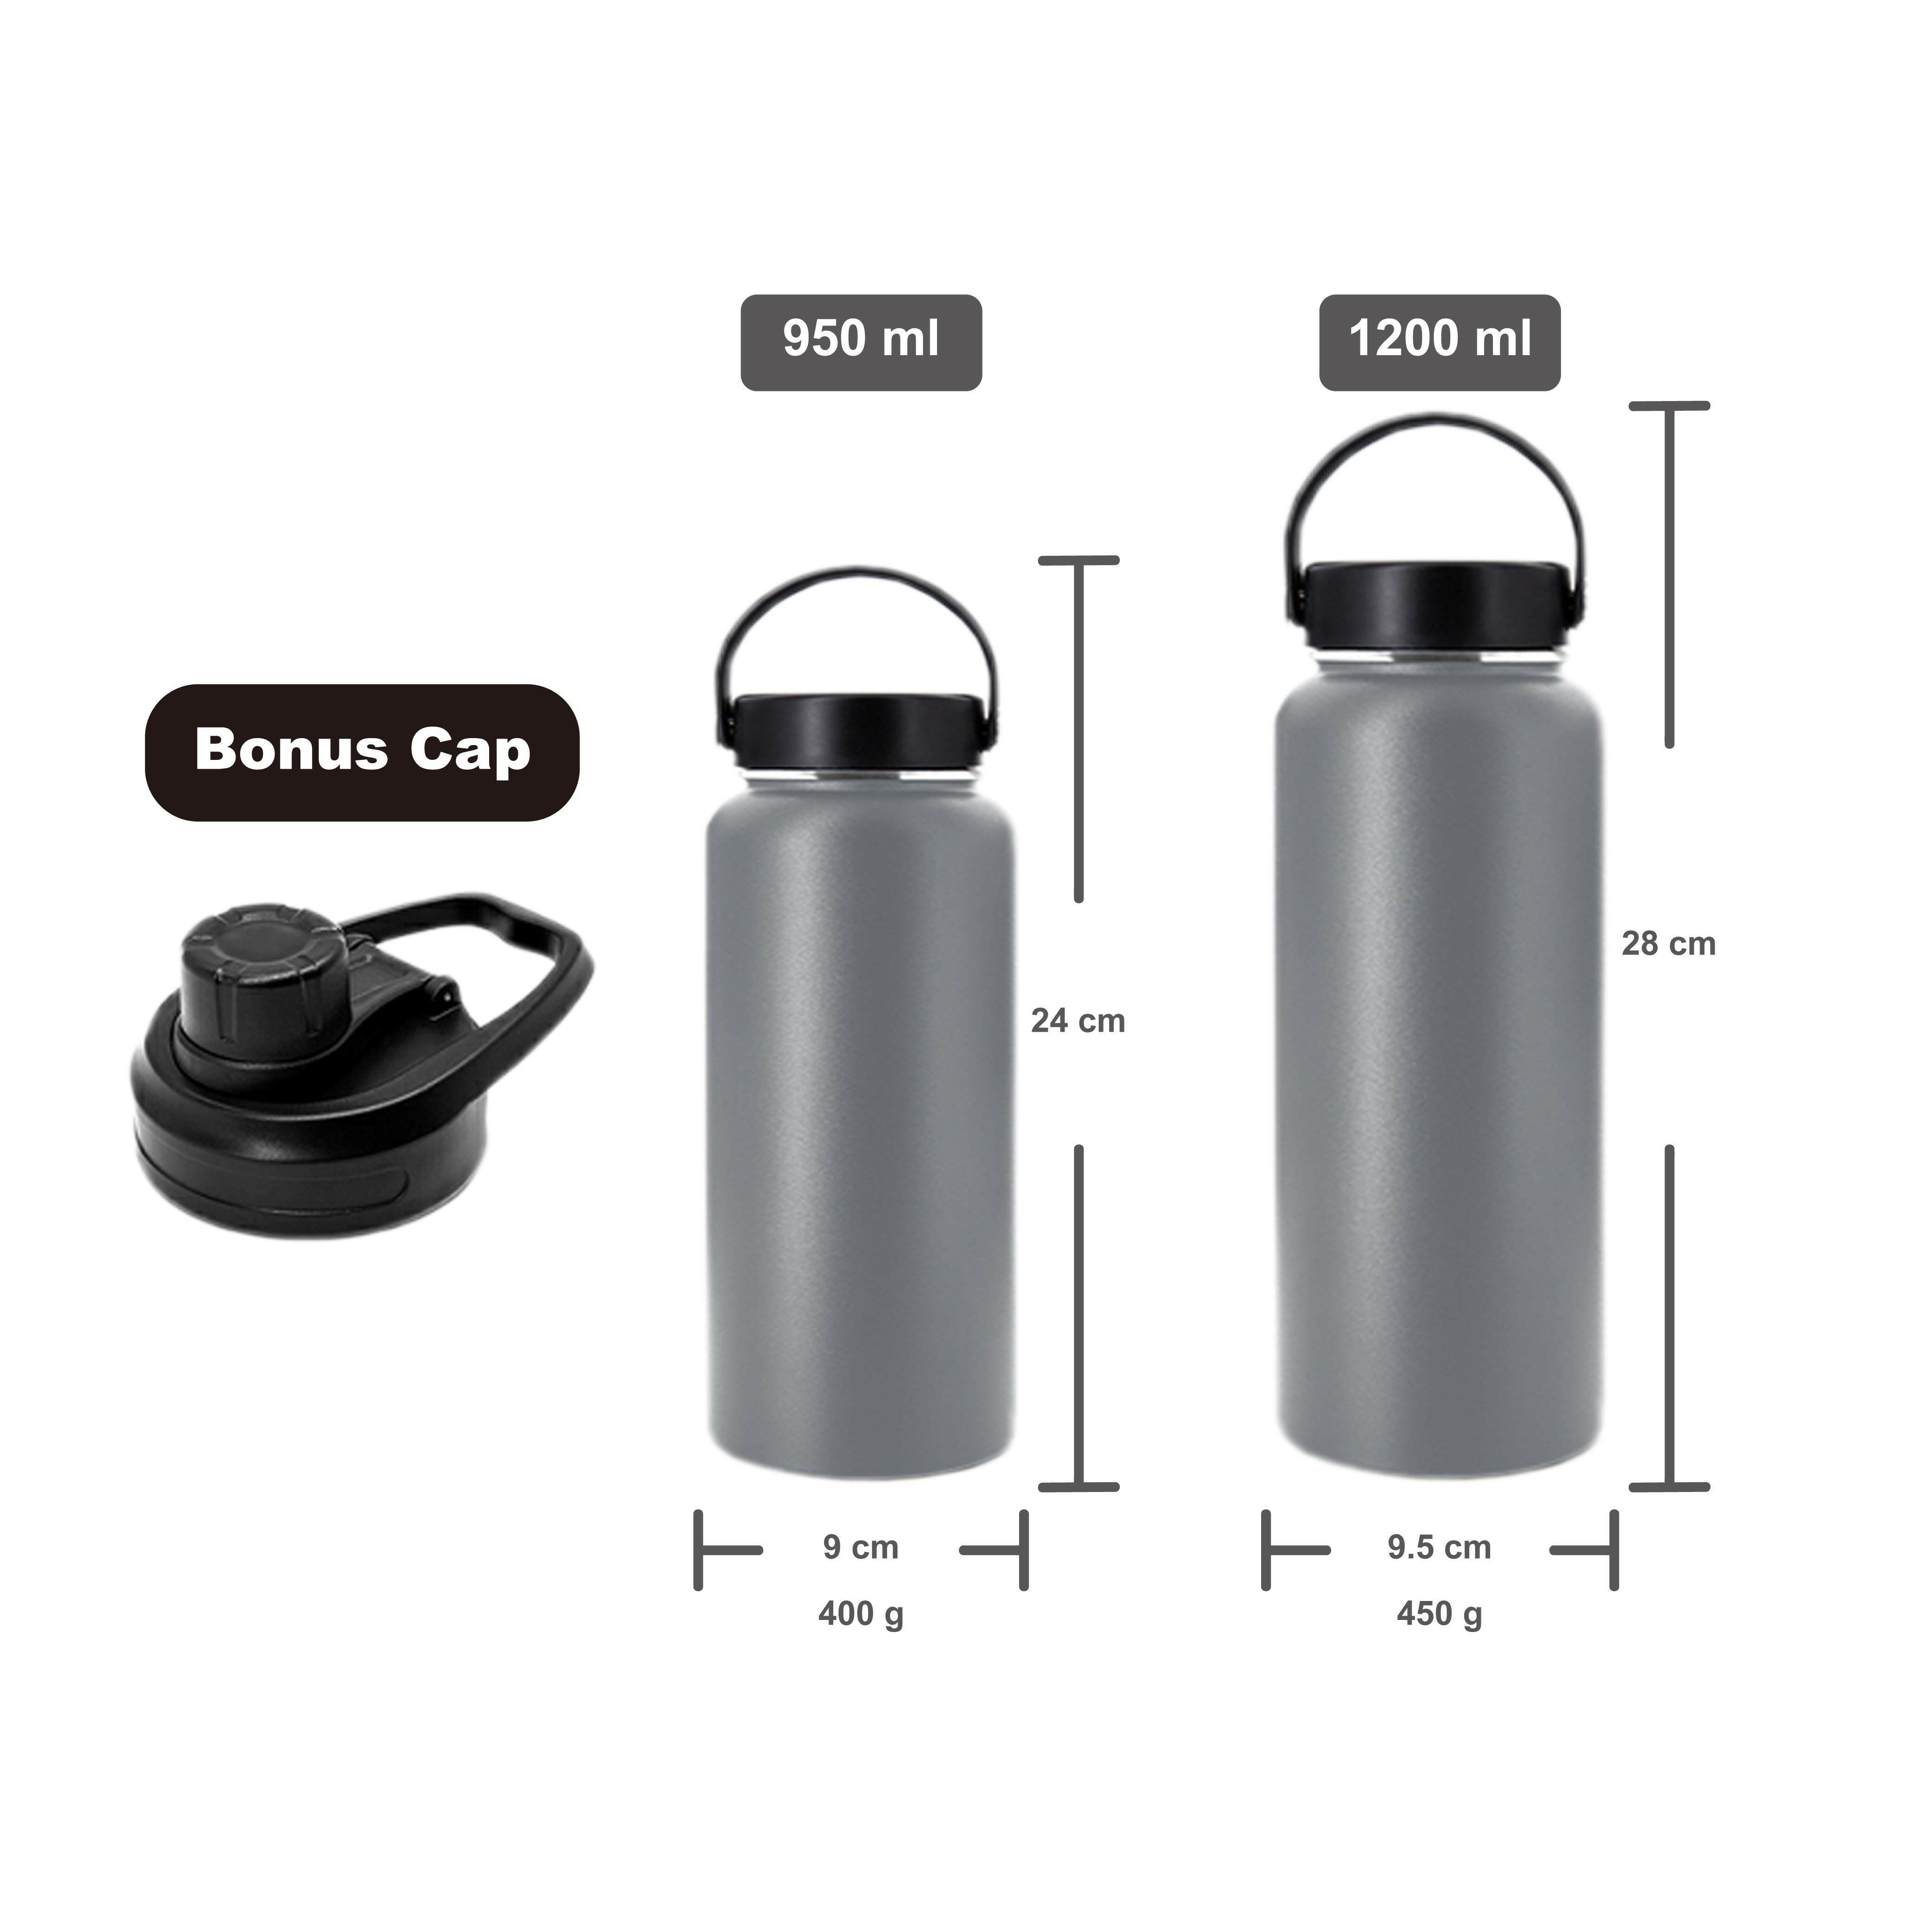 Hydro Mate Insulated Stainless Steel Water Bottle Grey | Stainless Steel Water Bottles | Brilliant Home Living